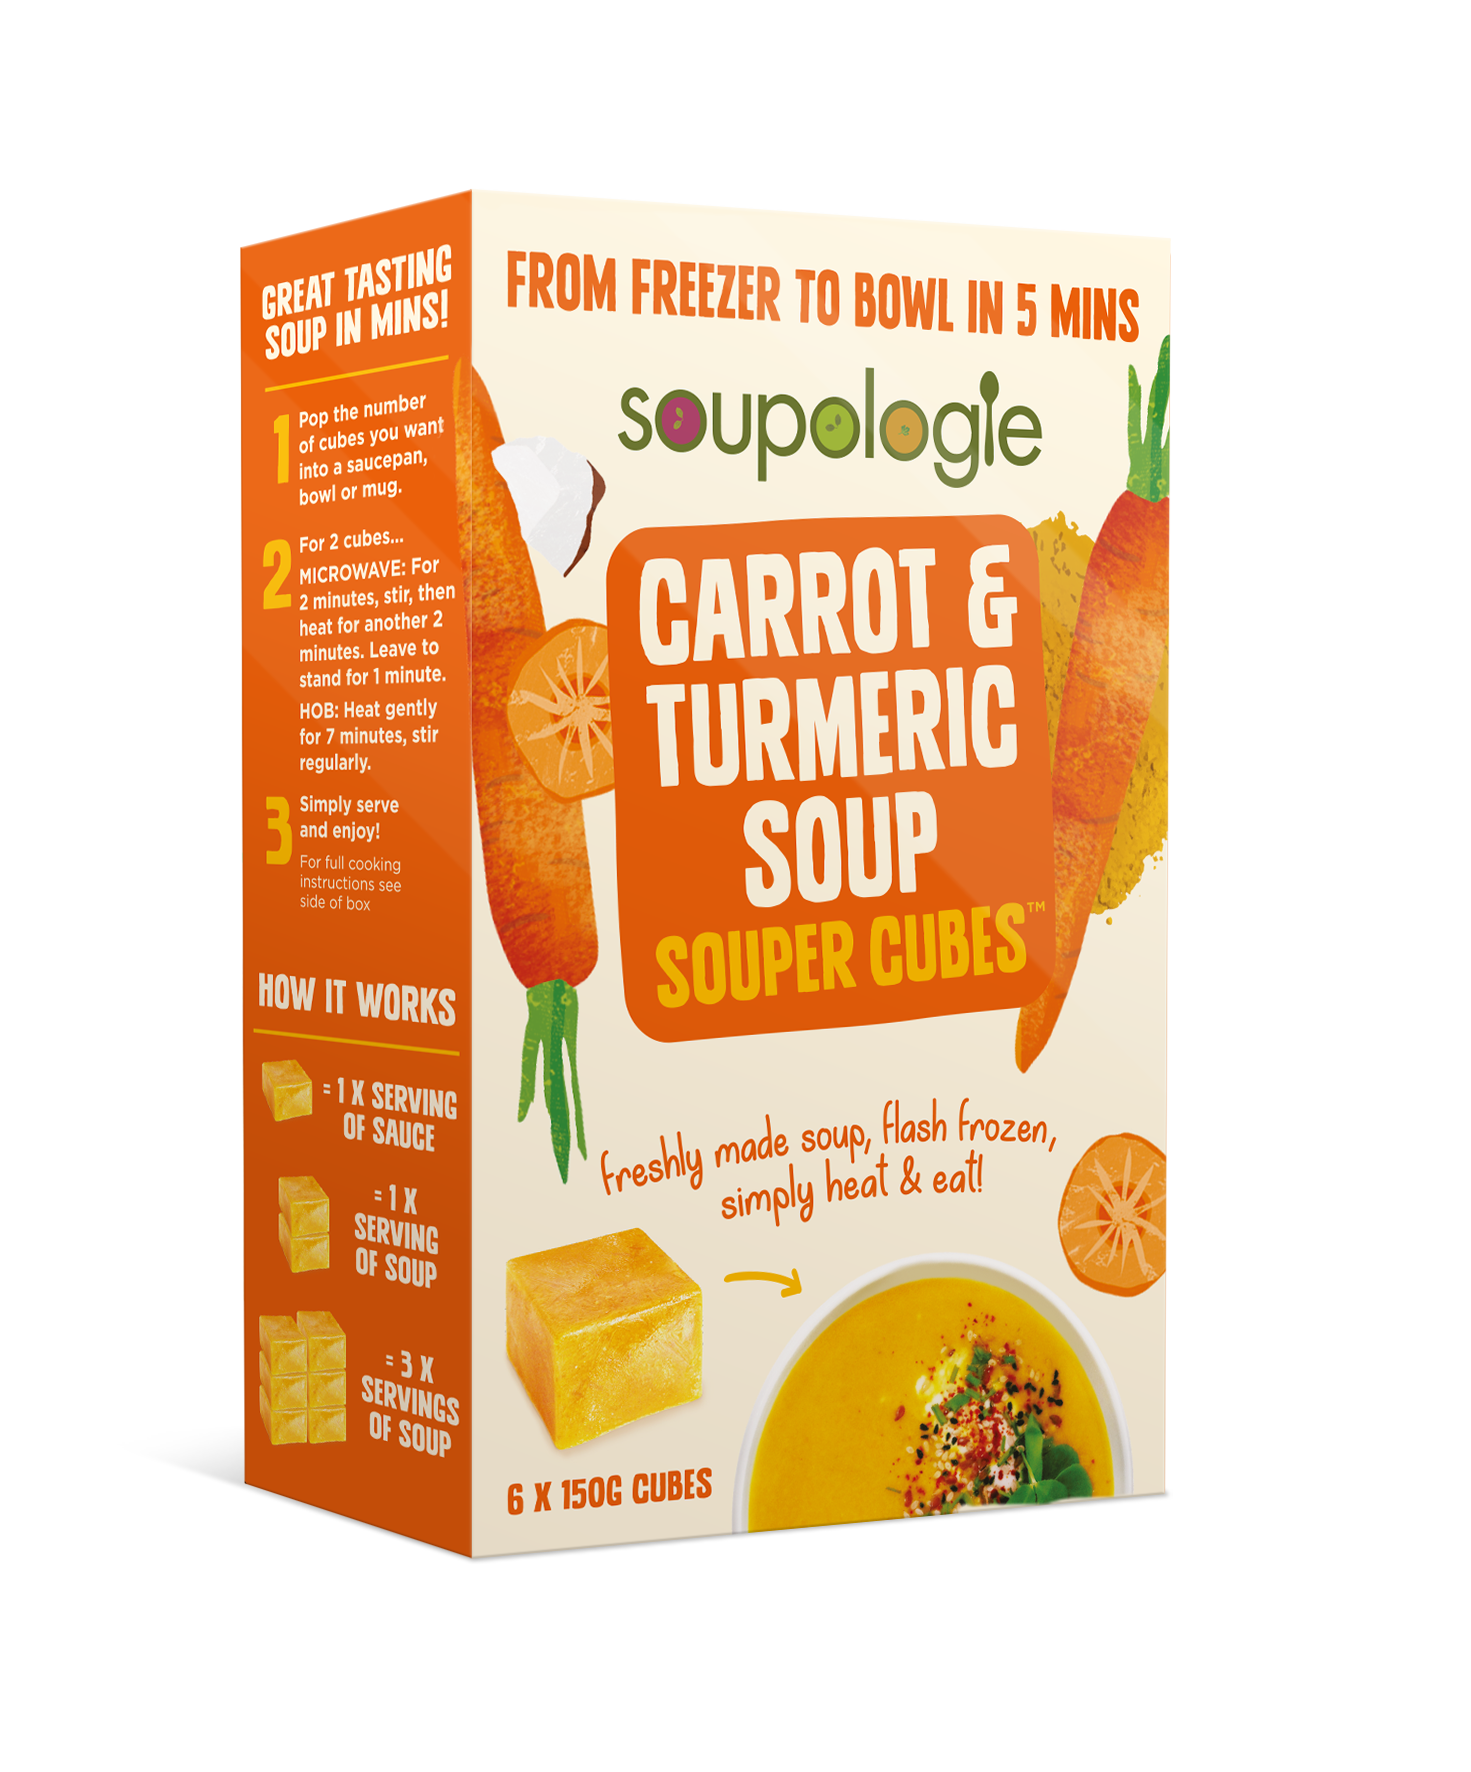 Soupologie’s eco-friendly, frozen soup cubes now available from wholesalers